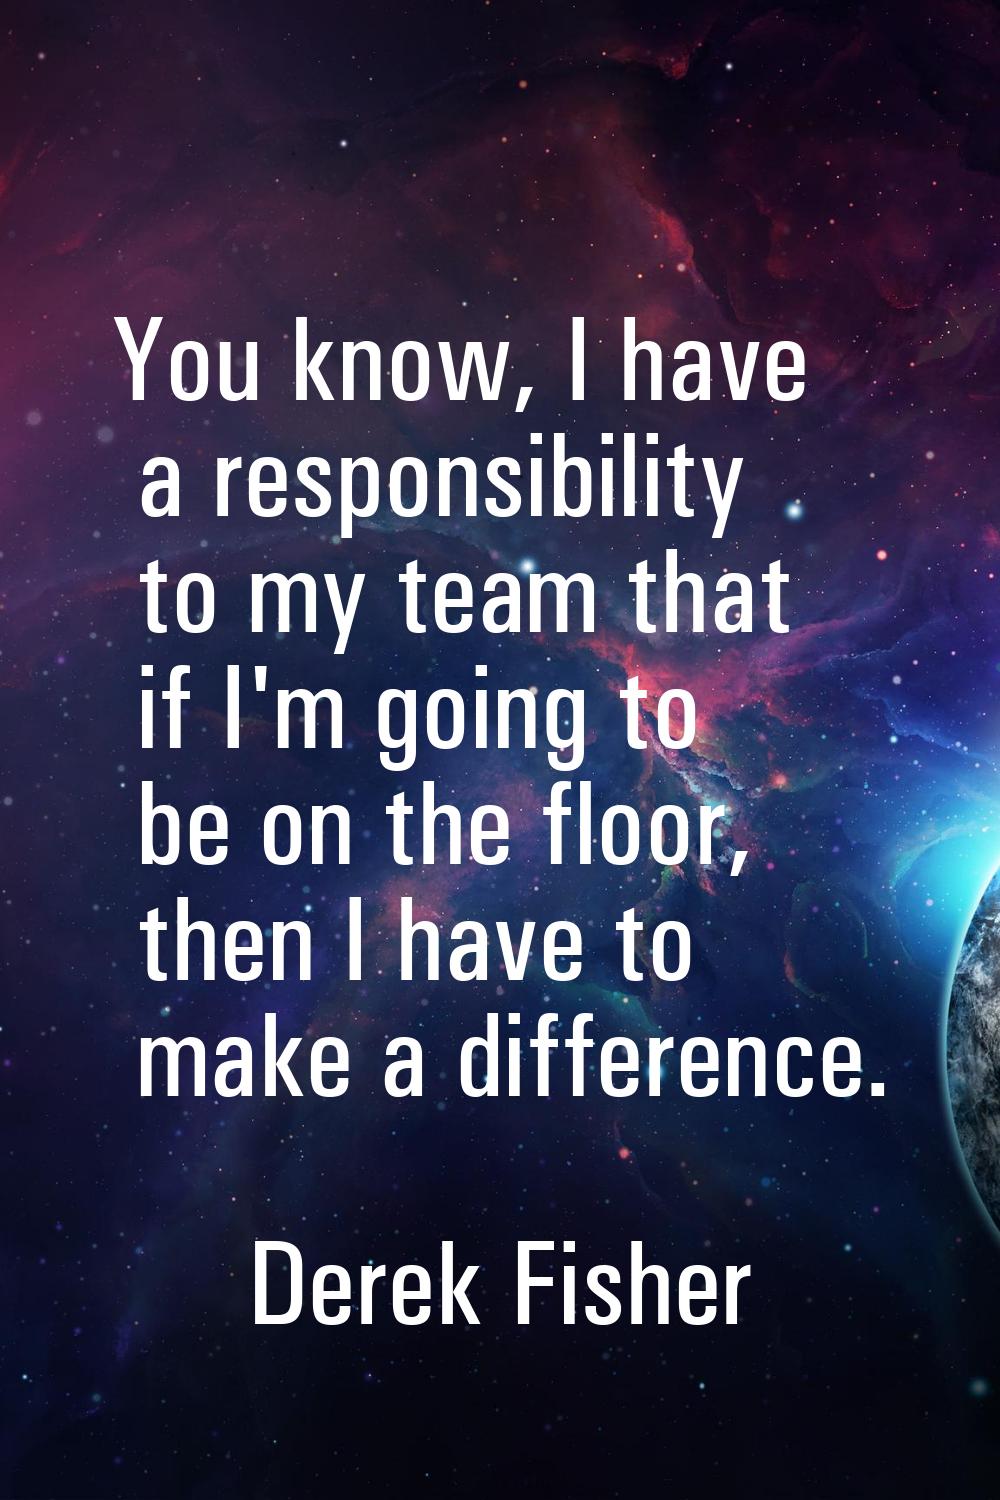 You know, I have a responsibility to my team that if I'm going to be on the floor, then I have to m